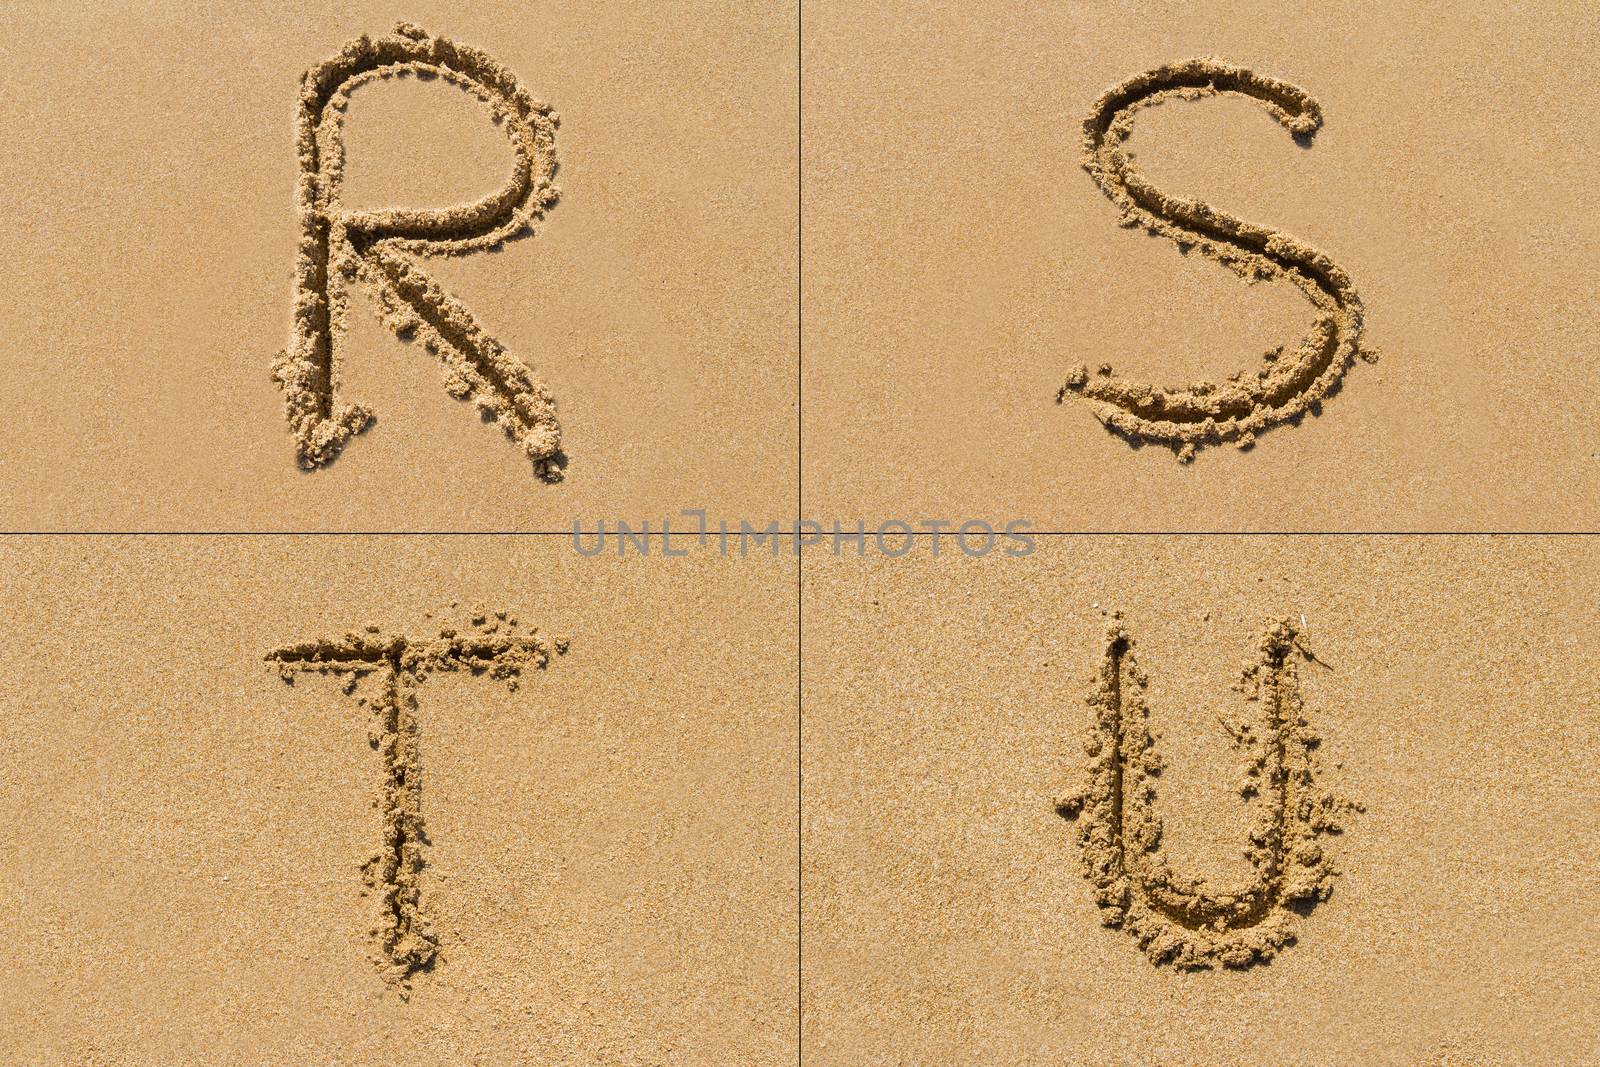 Conceptual set of R S T U letter of the alphabet written on sand with upper case.